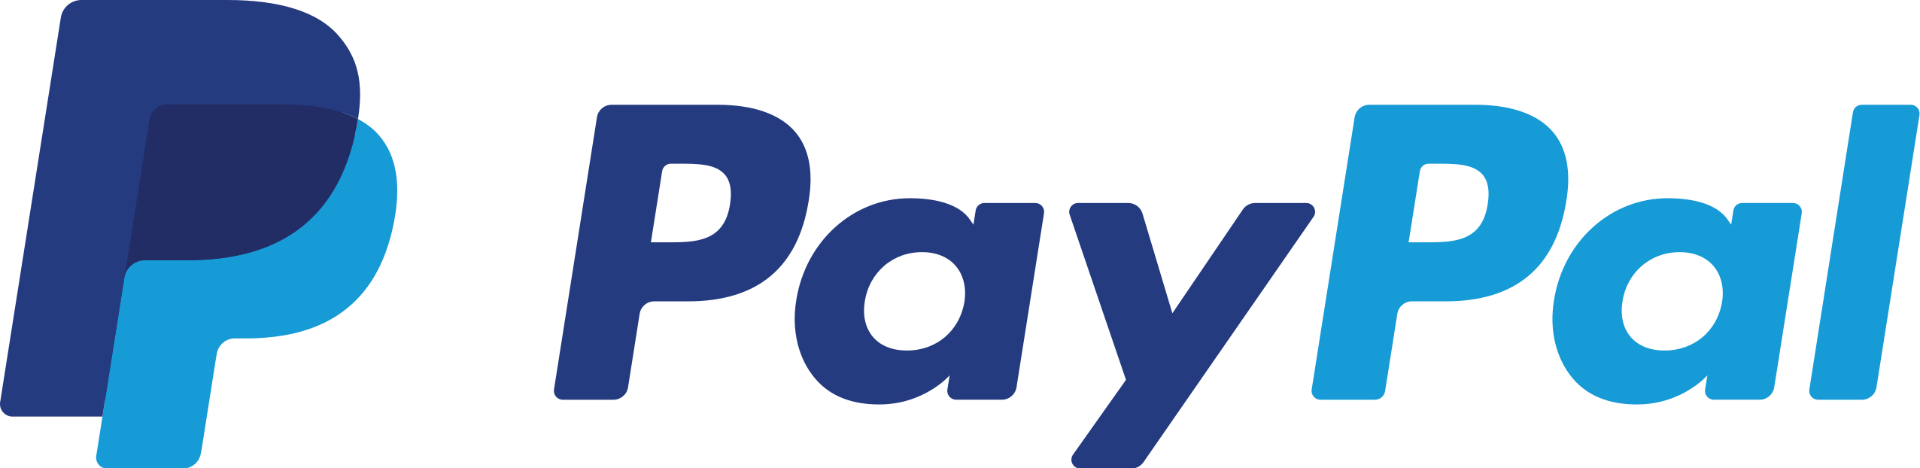 PayPal Accepted by Combens Electricals.